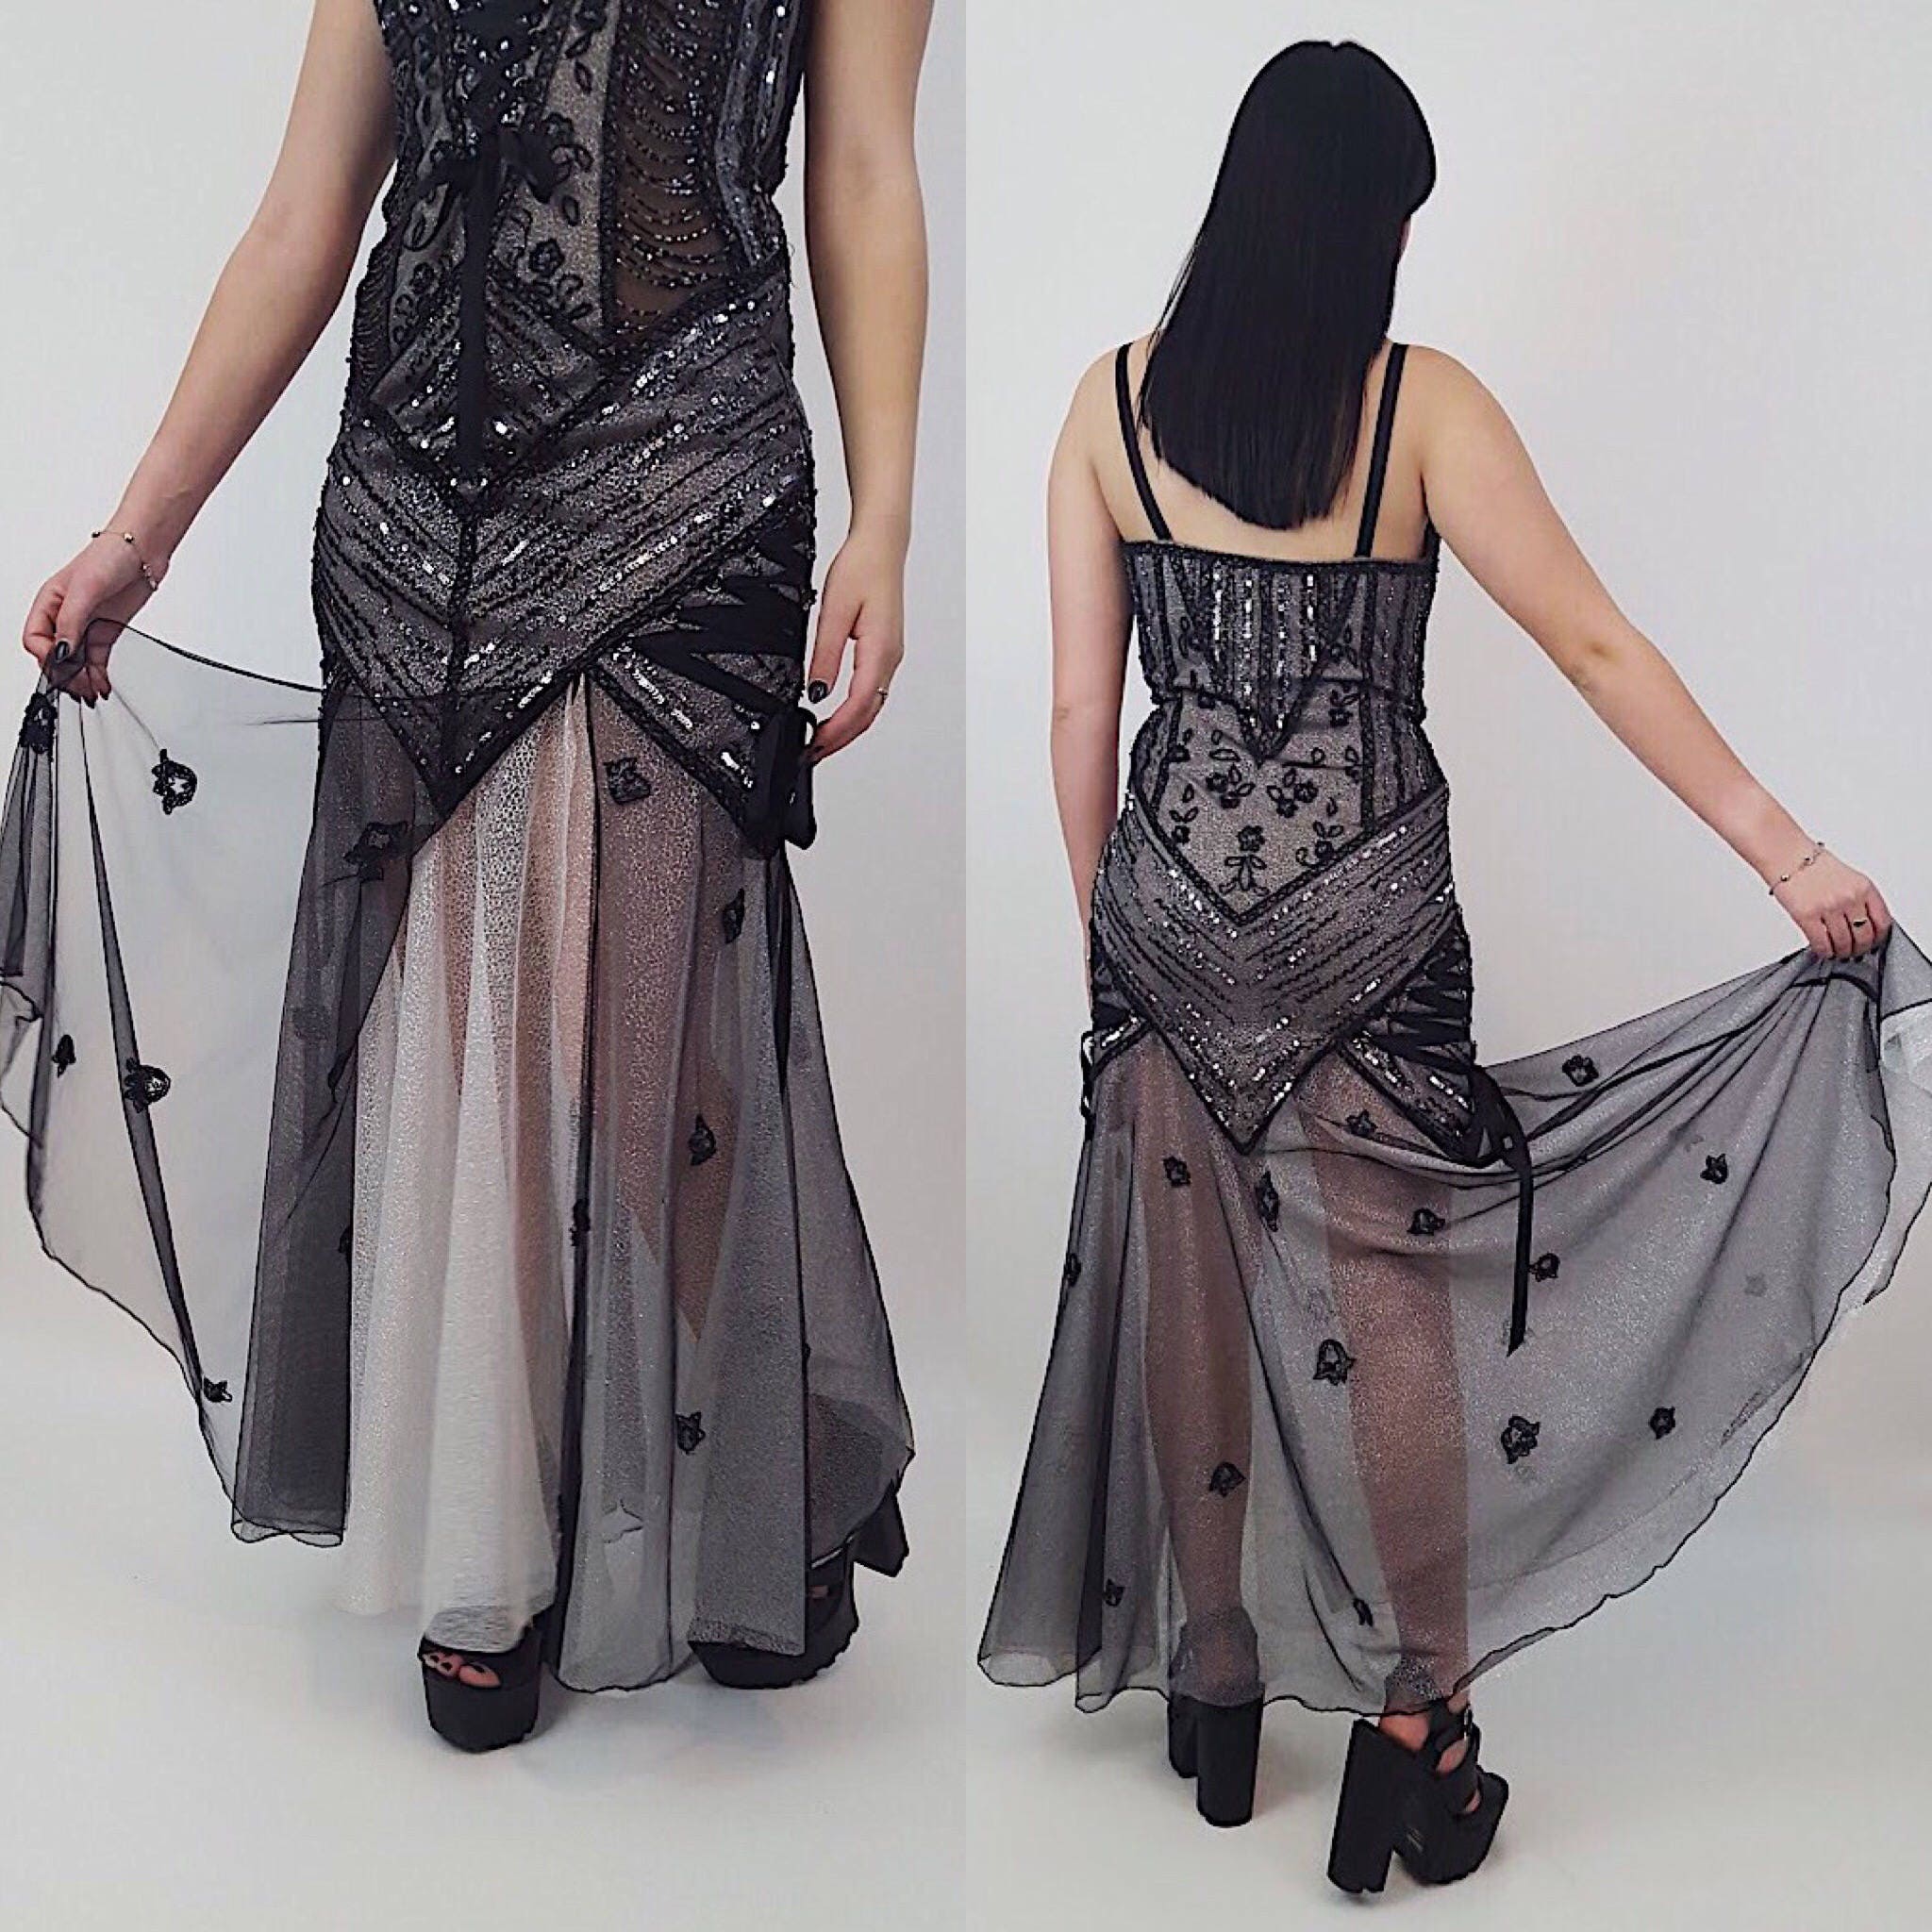 black dress with silver sparkles